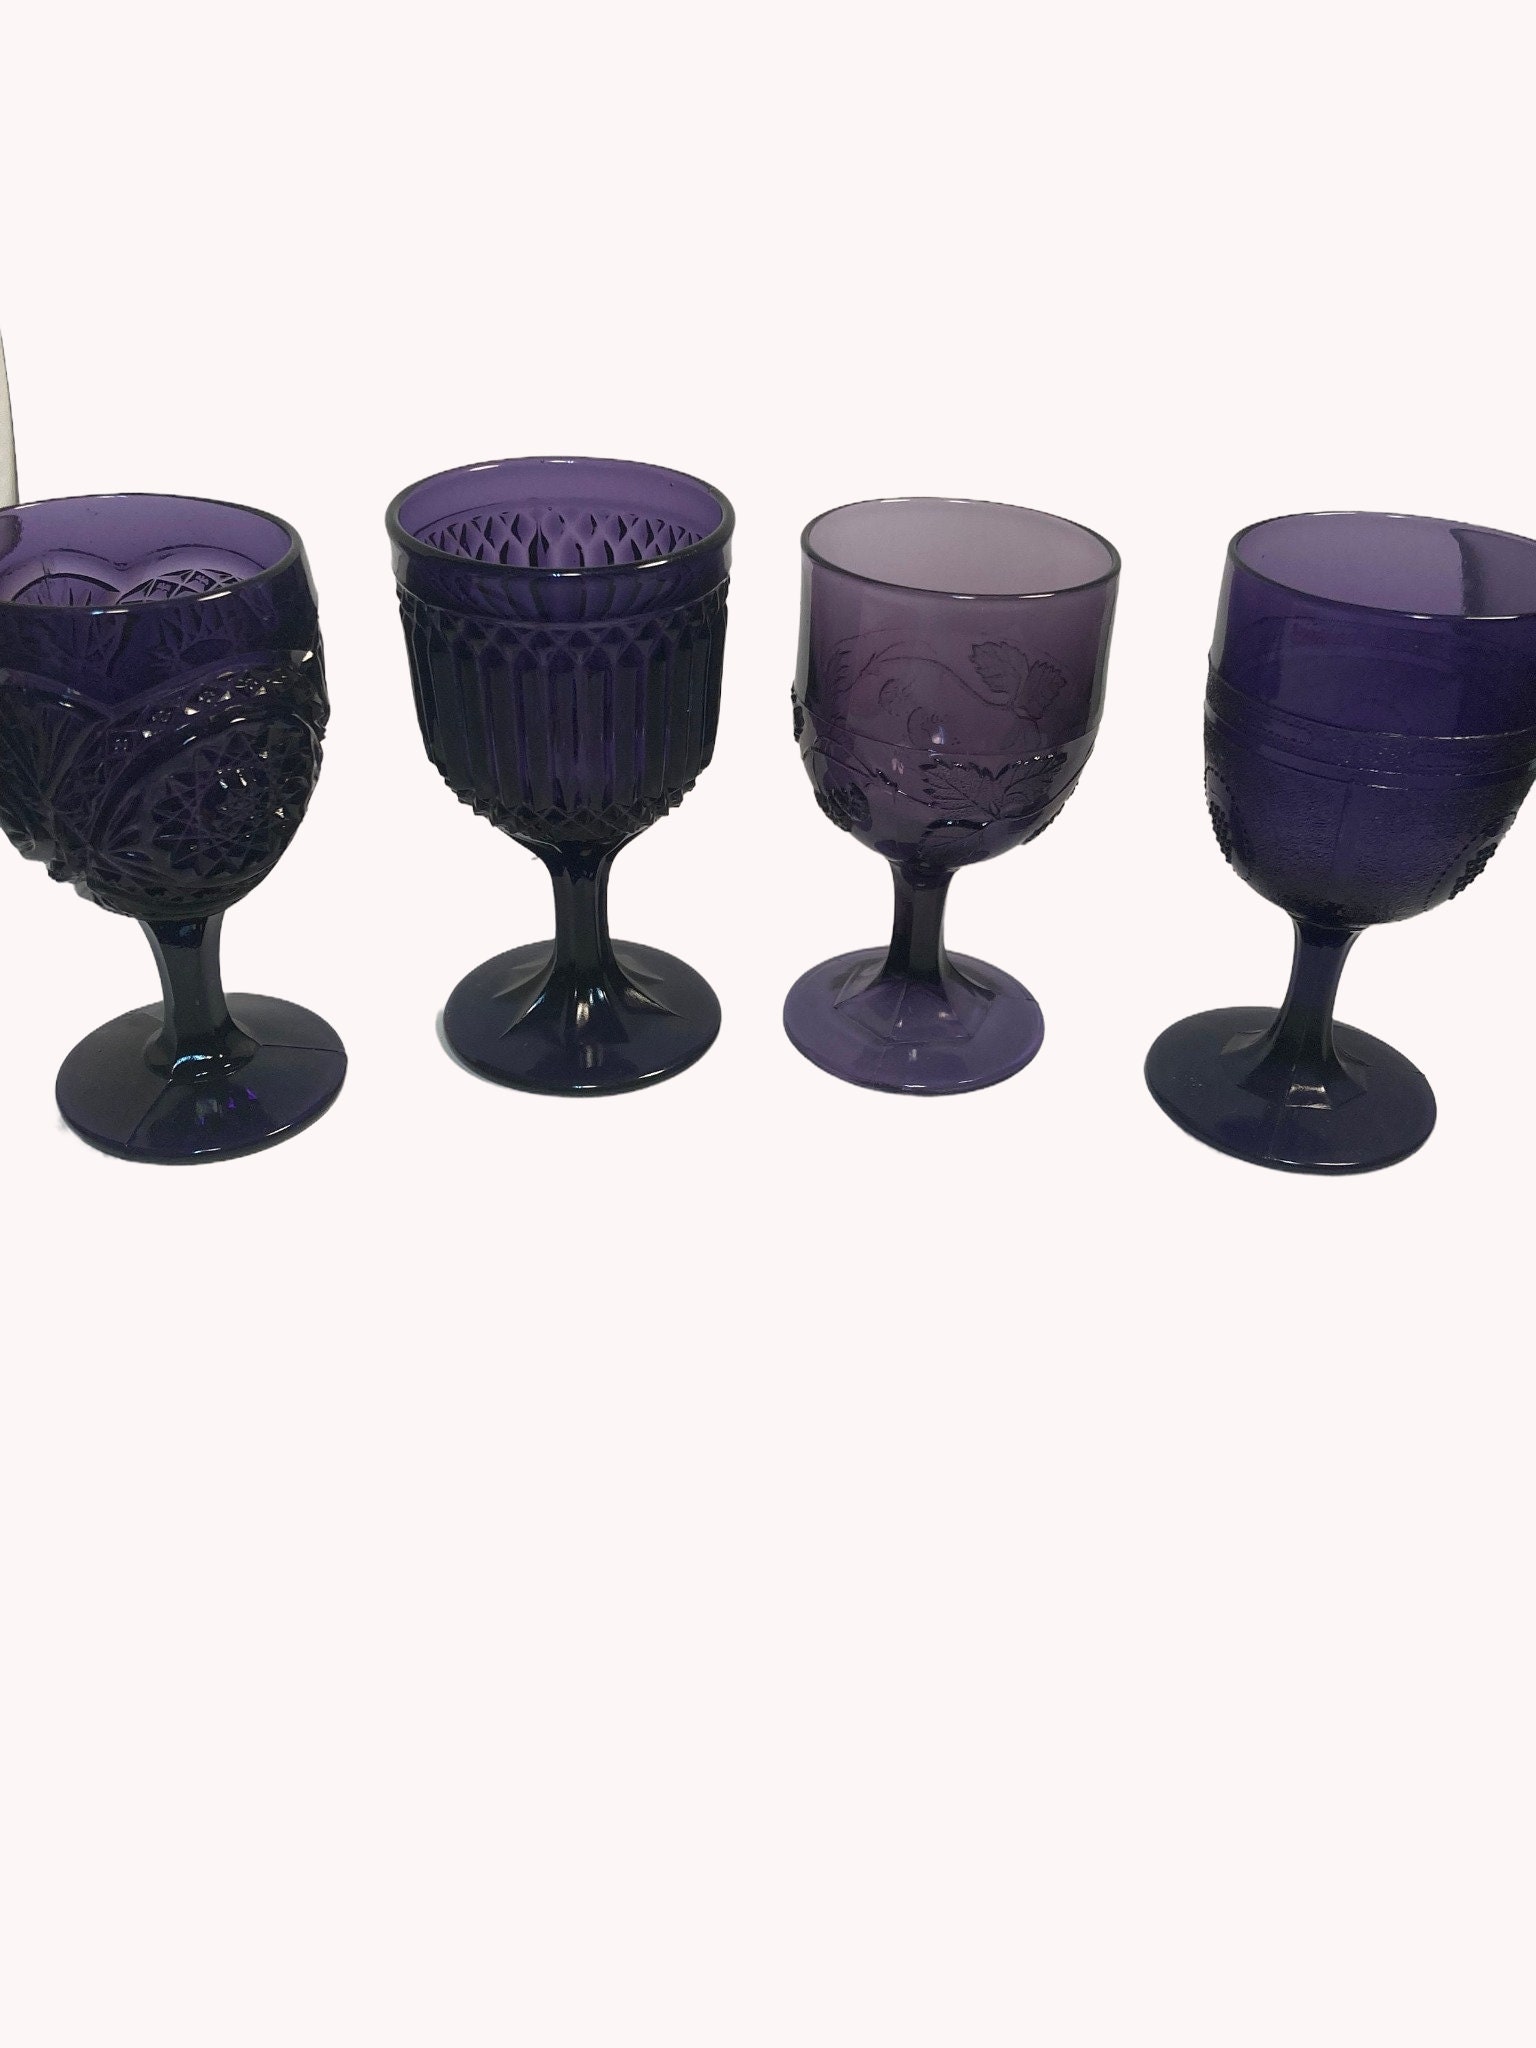 American Atelier Vintage Purple Wine Glasses | Set of 4 | Wine Goblets |  Colored Vintage Style Glass…See more American Atelier Vintage Purple Wine